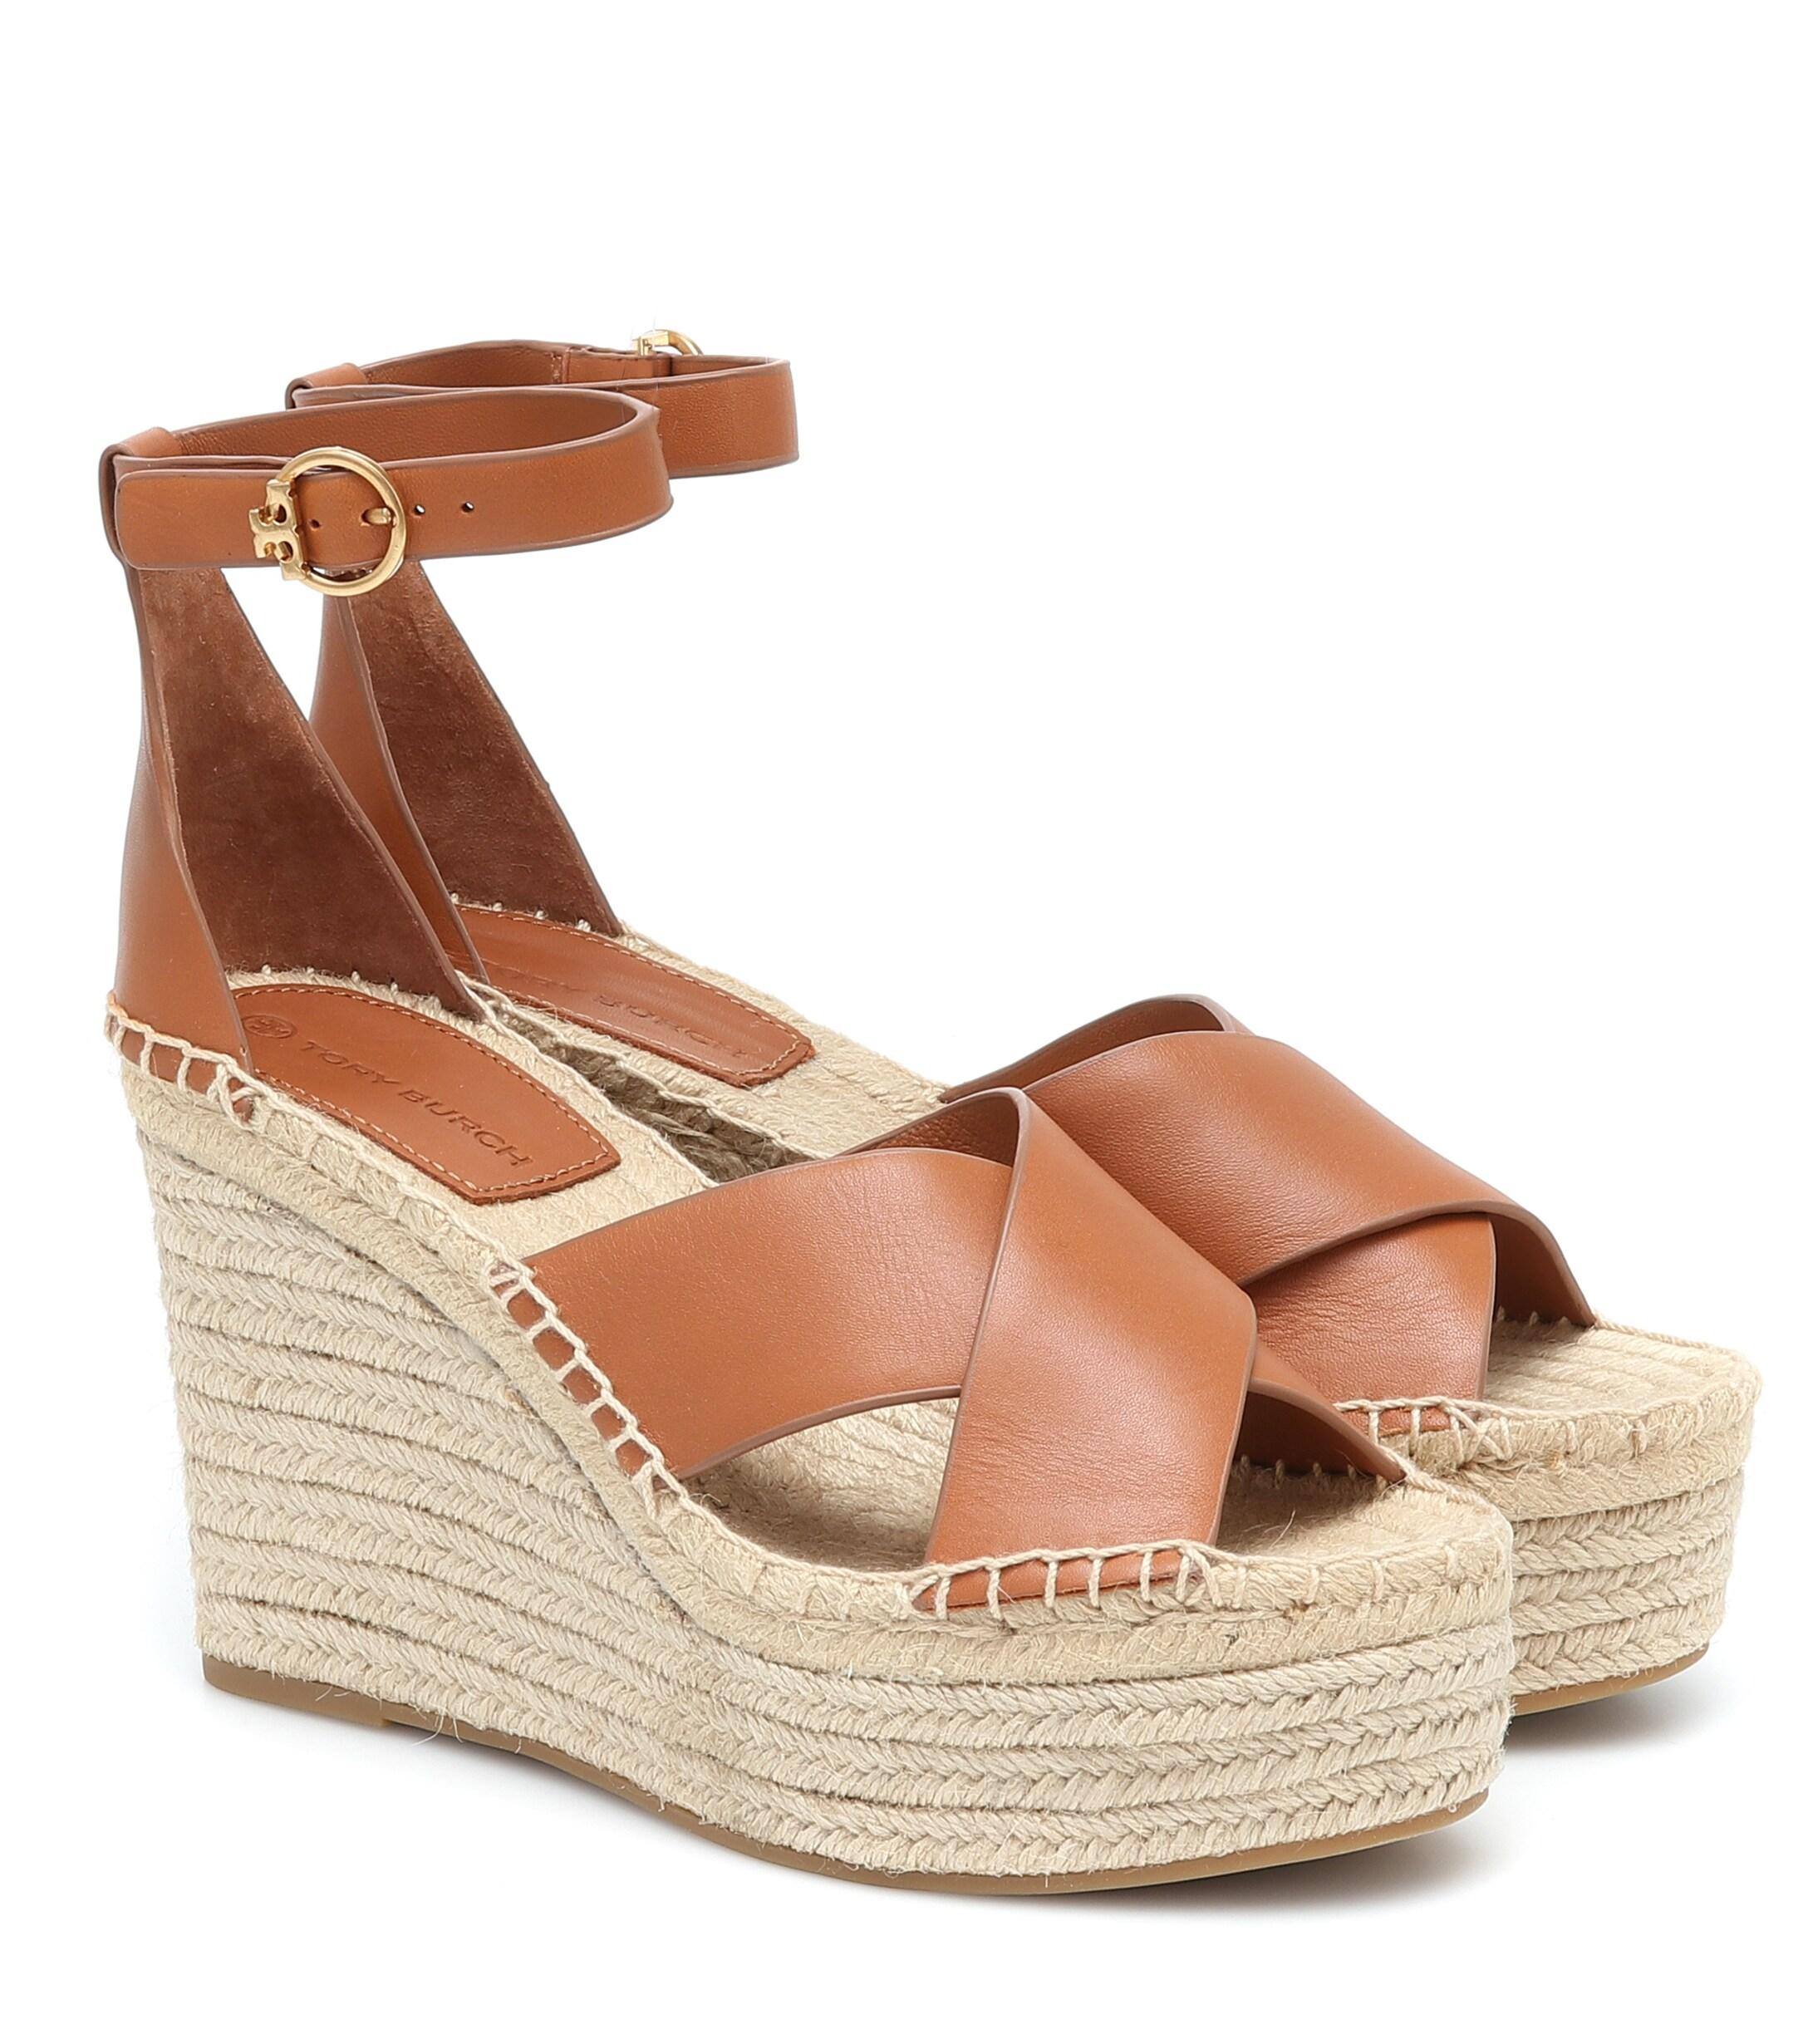 tory burch selby wedge espadrille sandal